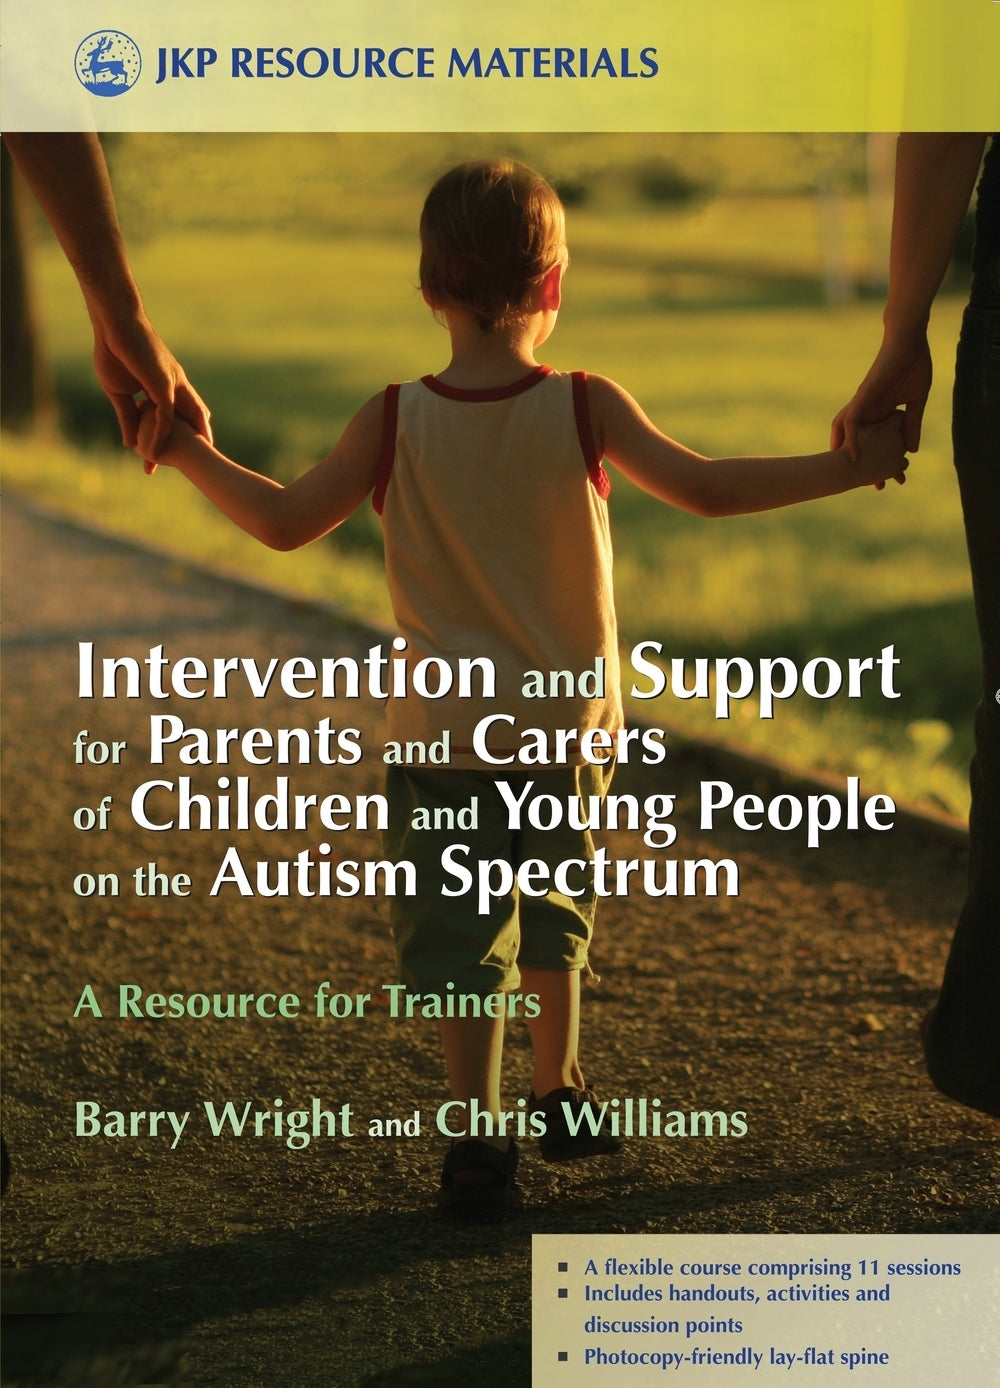 Intervention and Support for Parents and Carers of Children and Young People on the Autism Spectrum by Joanne Brayshaw, Christopher Williams